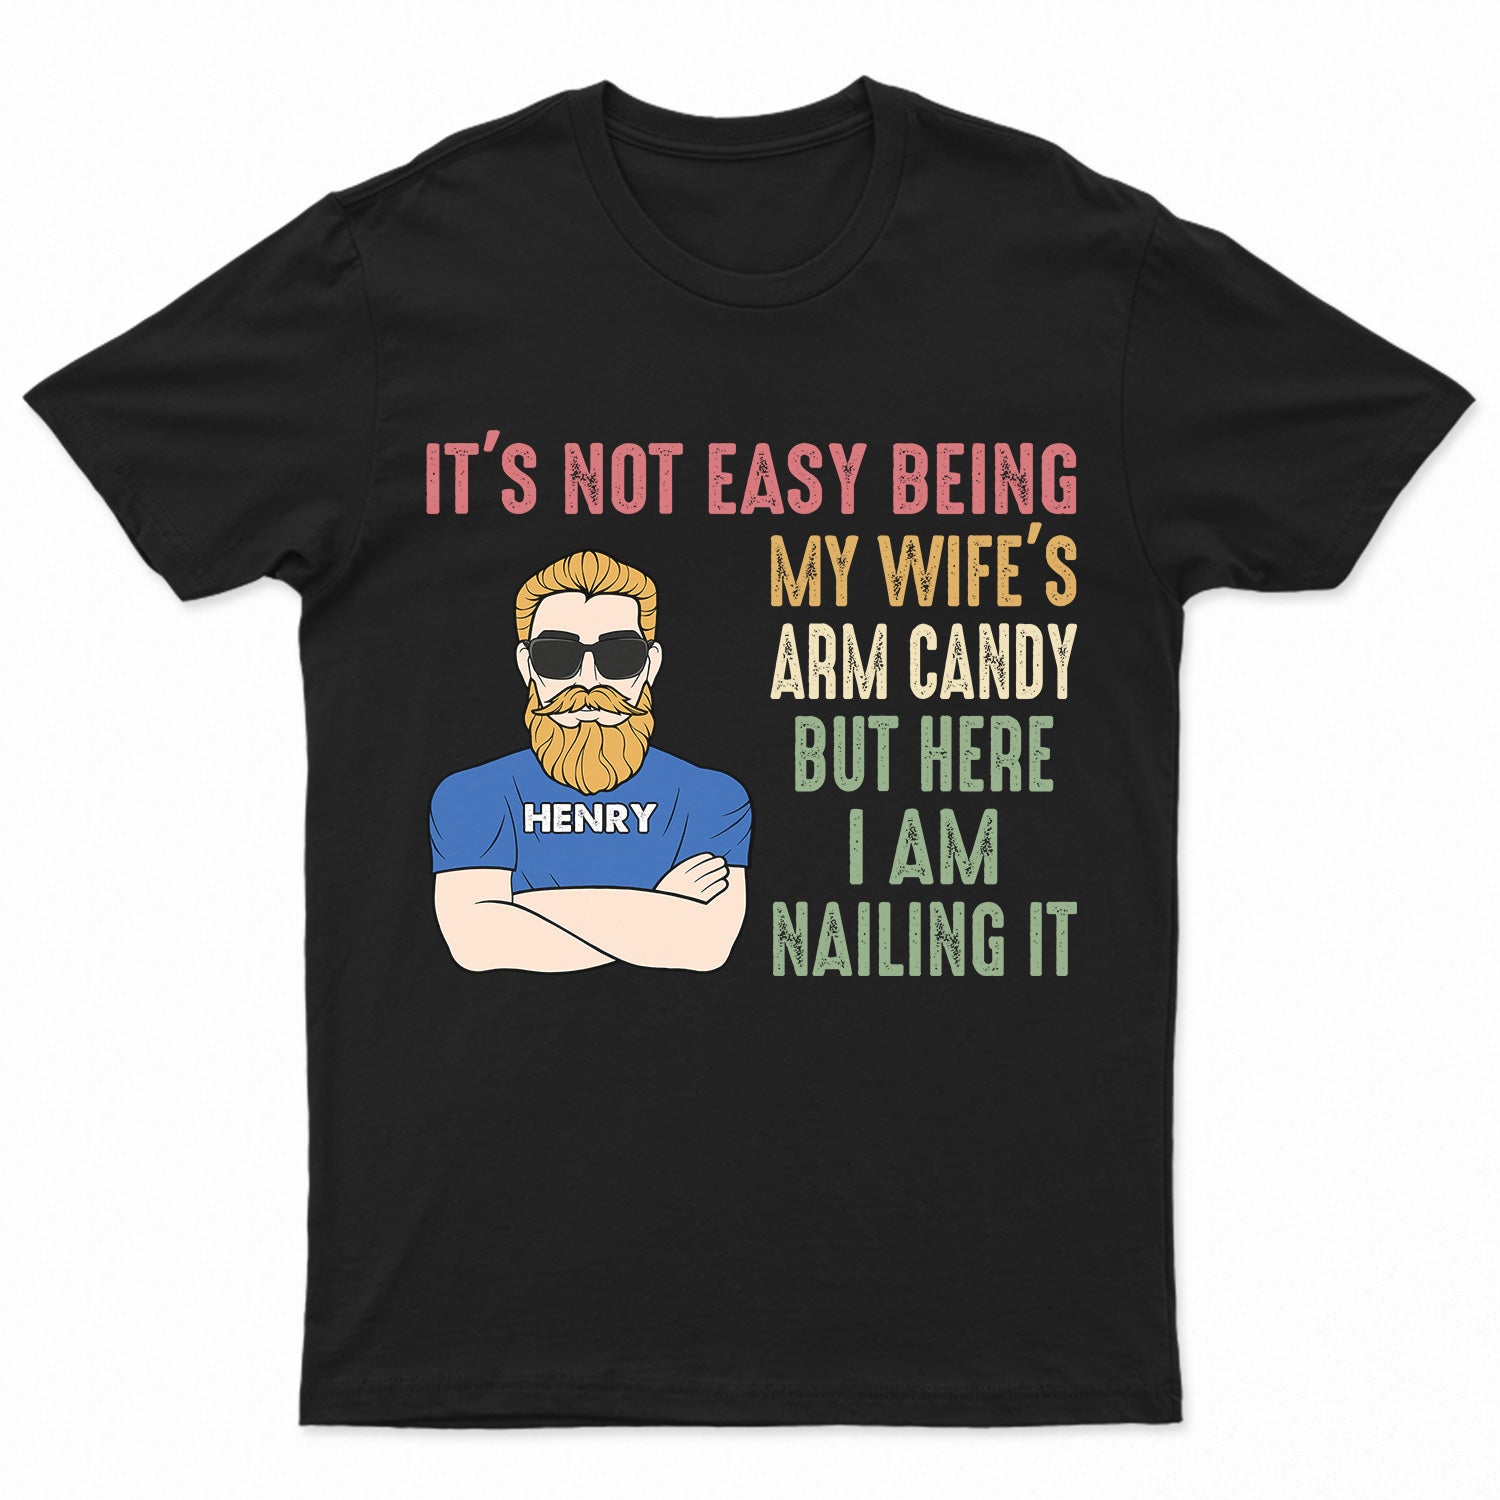 It's Not Easy Being My Wife's Arm Candy - Funny Gift For Dad, Father, Husband - Personalized T Shirt